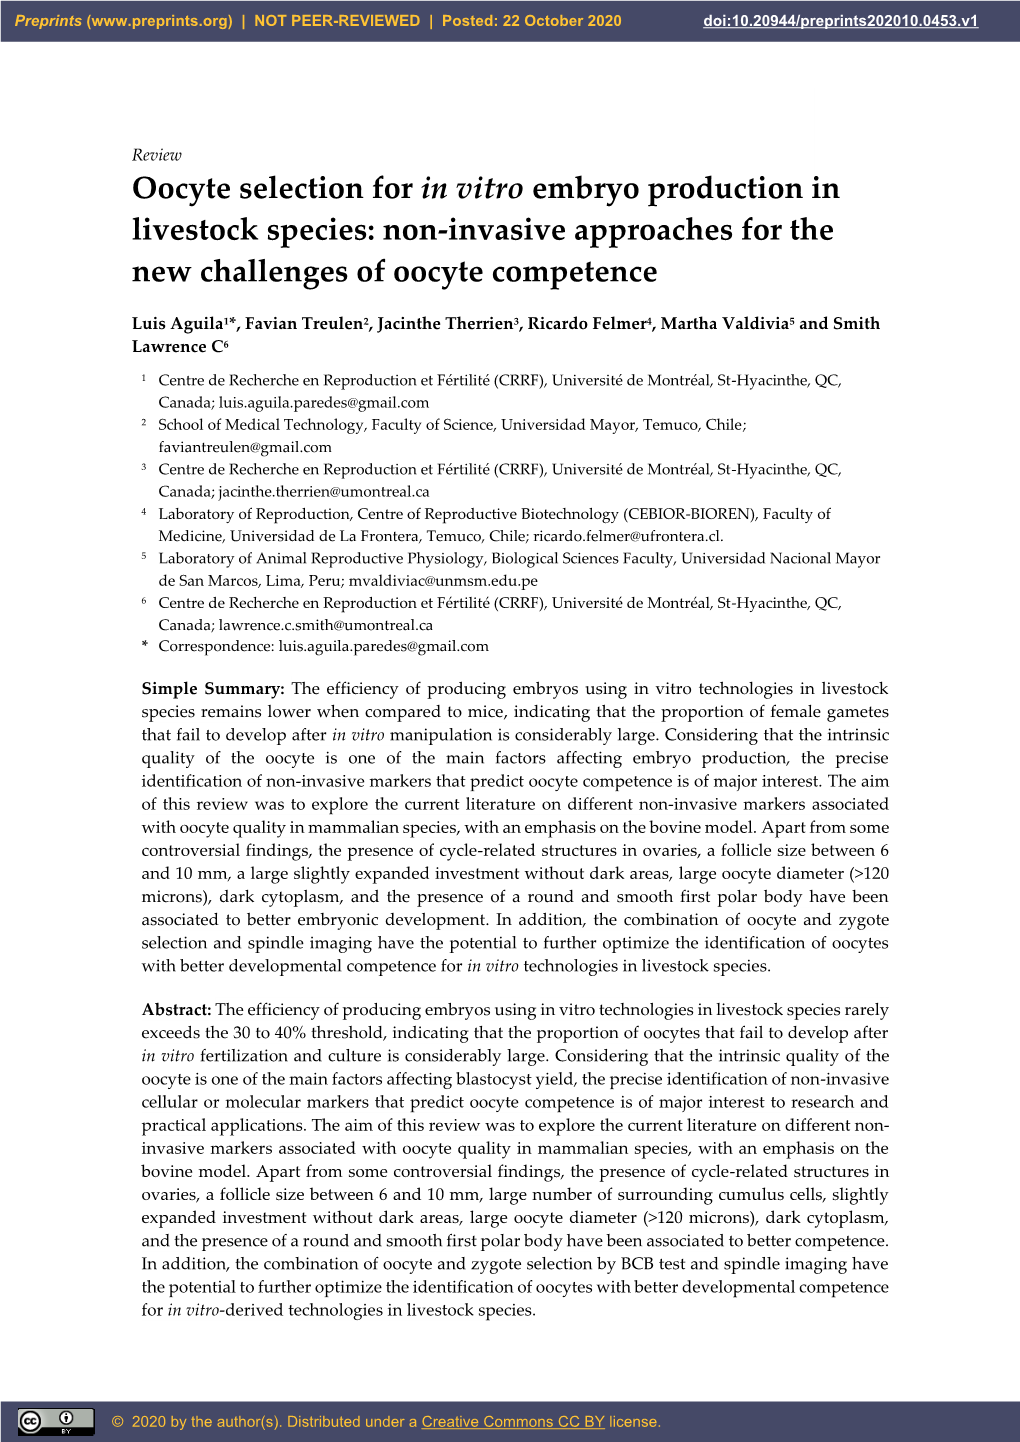 Oocyte Selection for in Vitro Embryo Production in Livestock Species: Non-Invasive Approaches for the New Challenges of Oocyte Competence